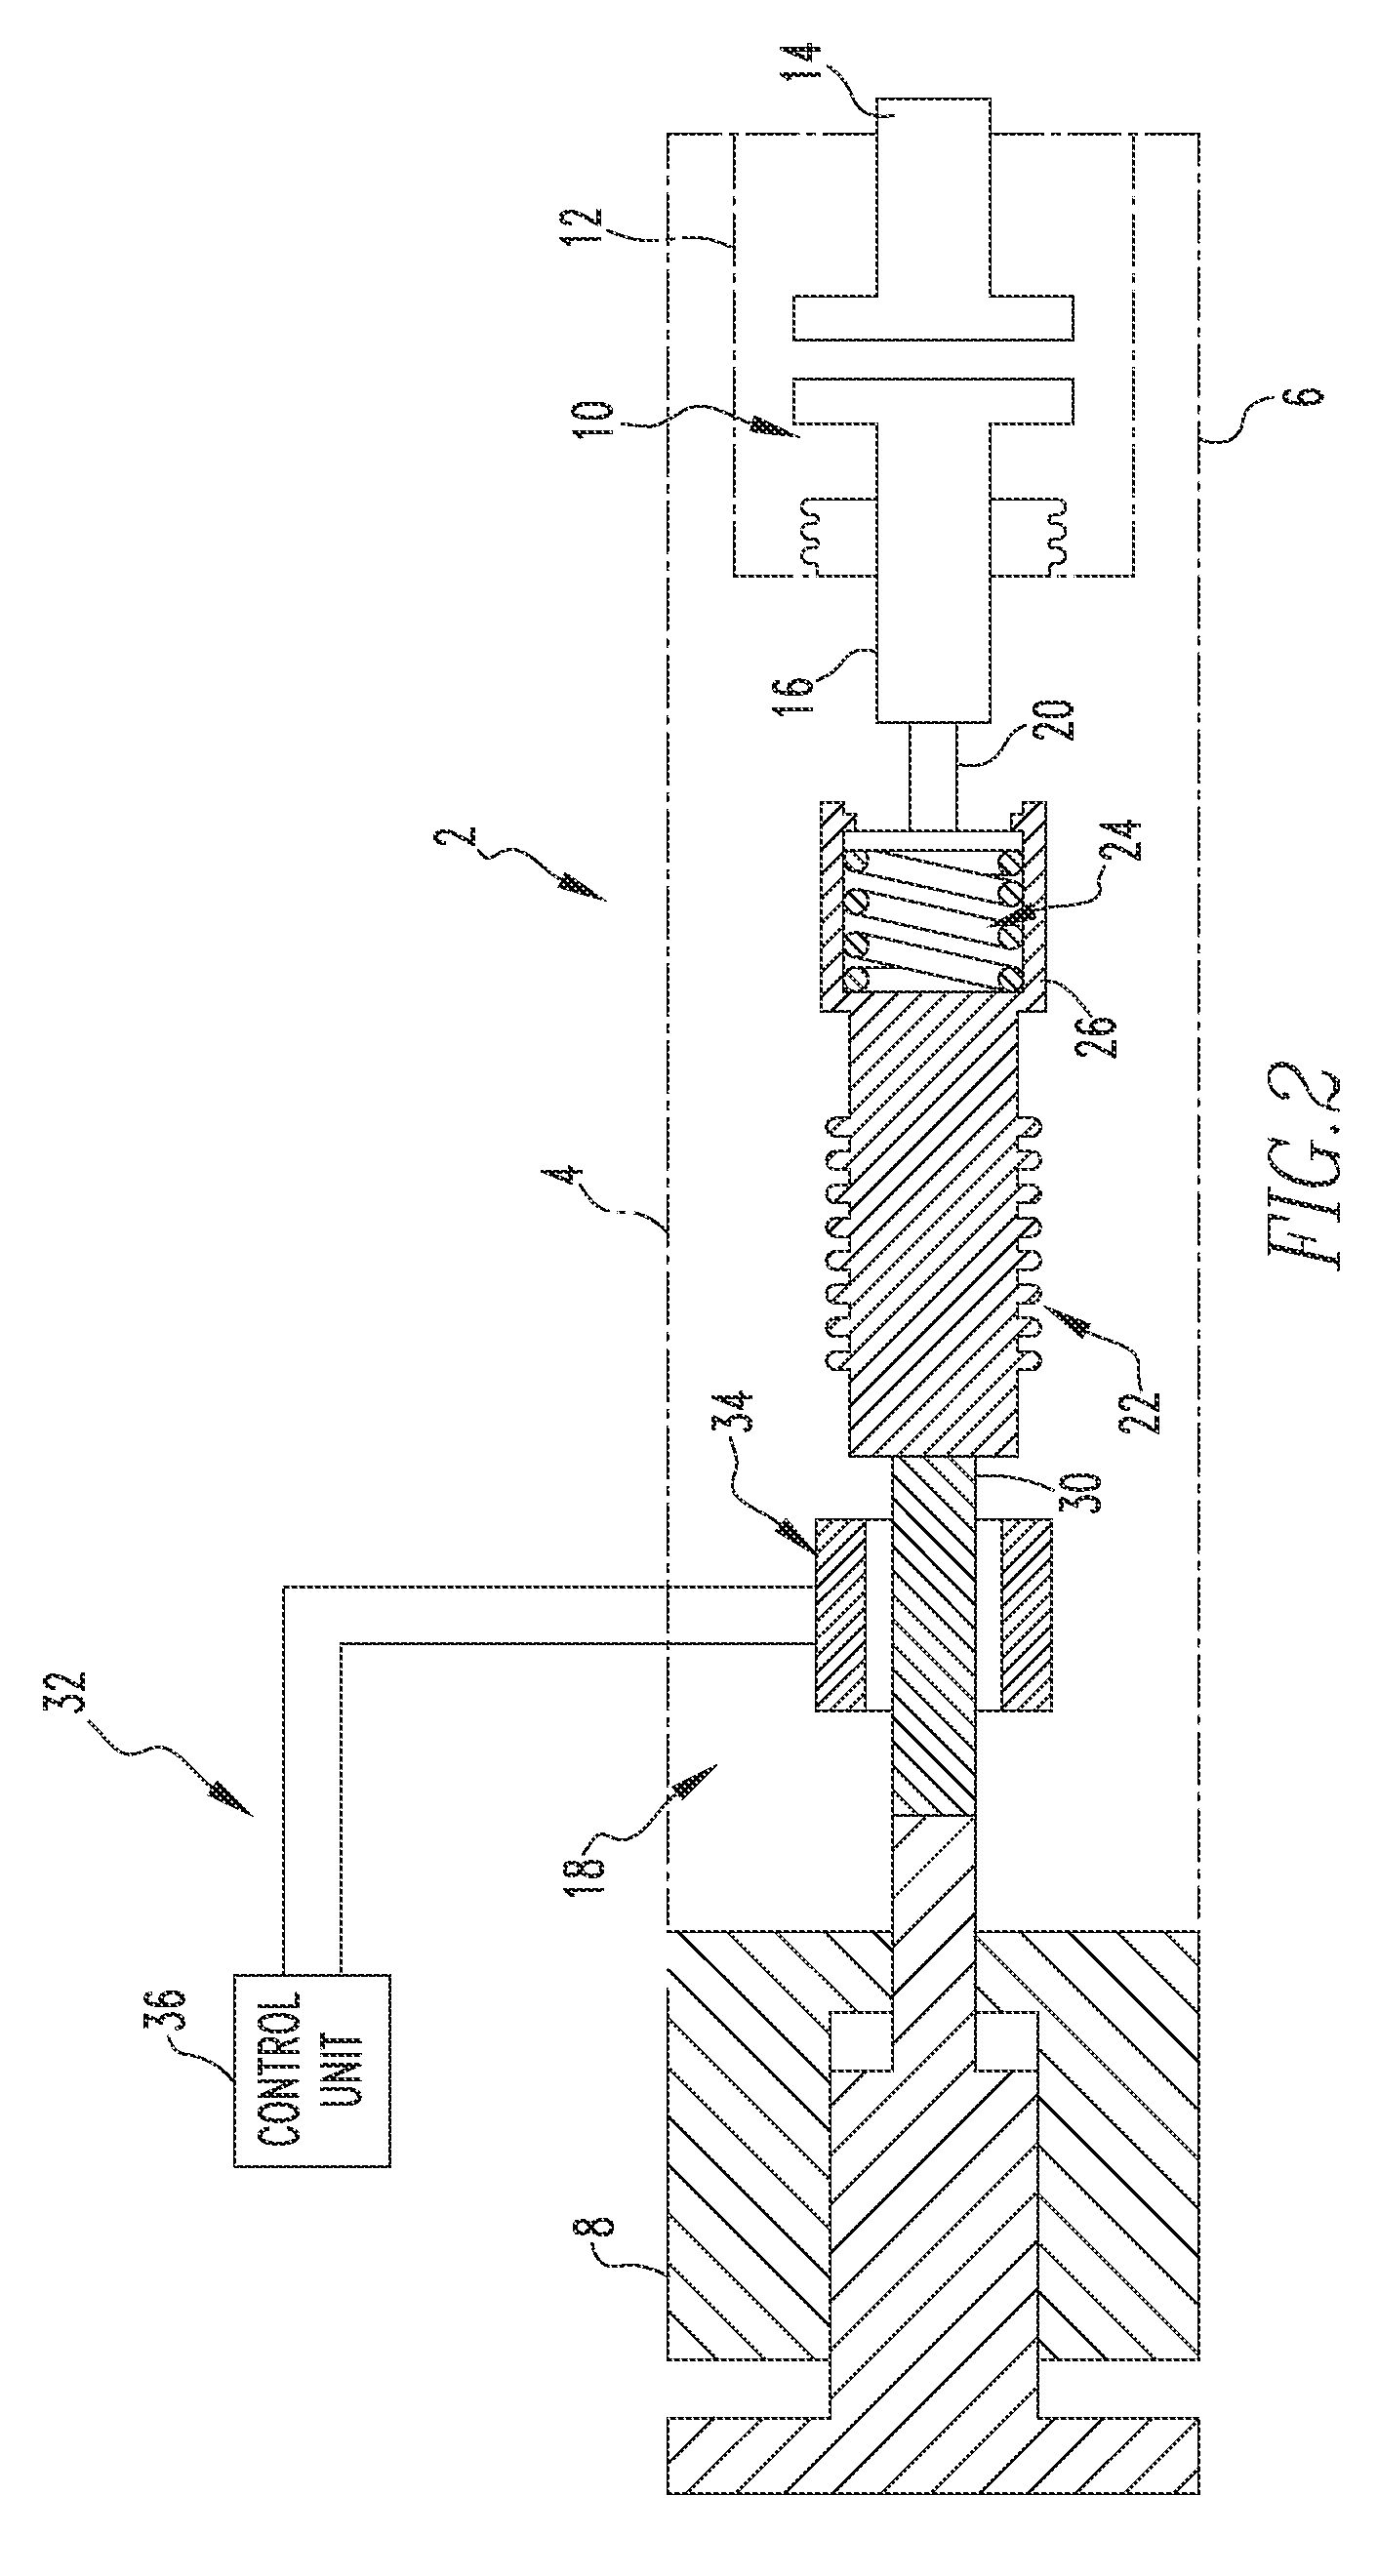 Circuit interrupter employing a linear transducer to monitor contact erosion